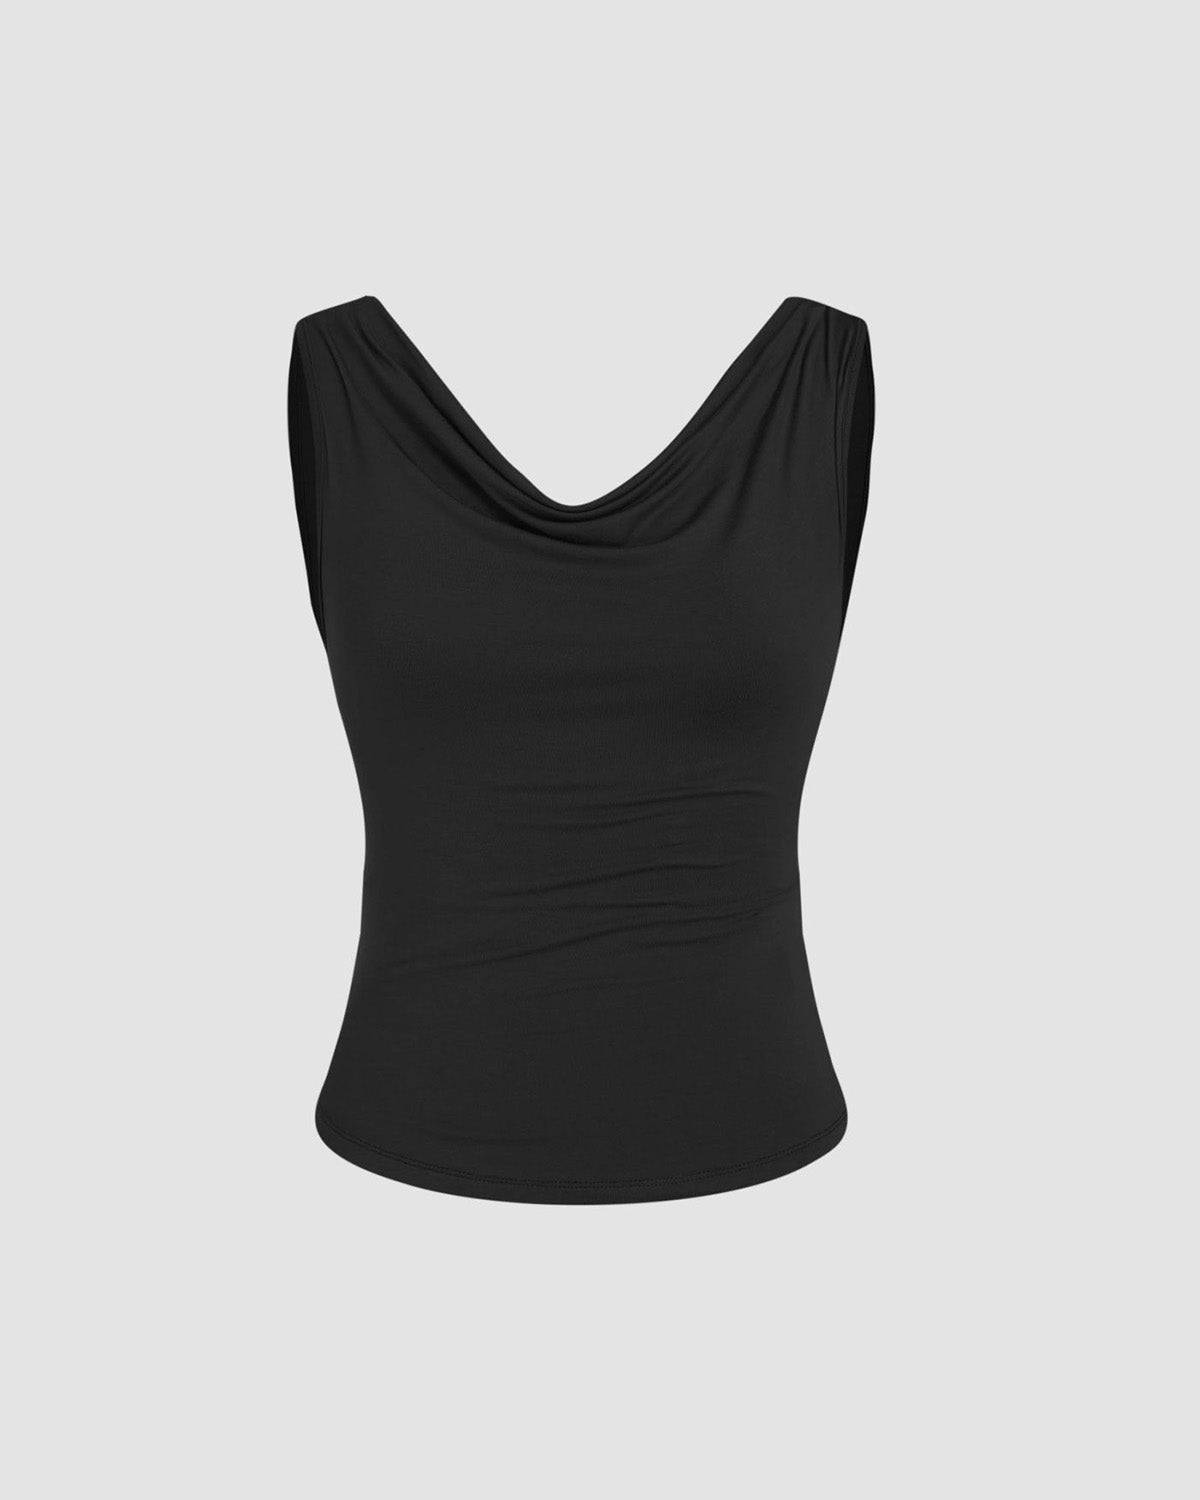 COWL NECK FITTED TOP